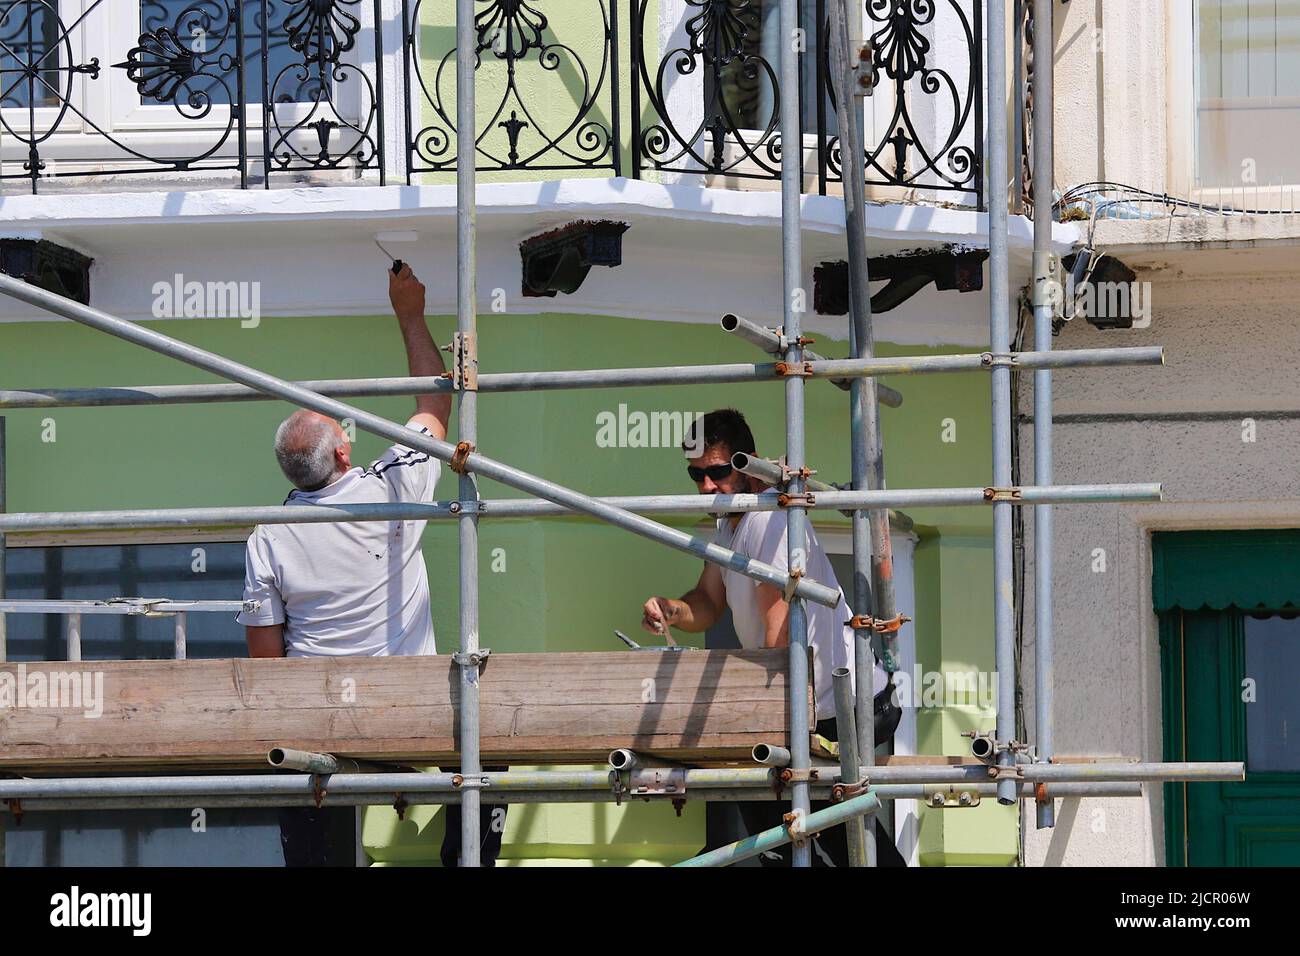 Hastings, East Sussex, UK. 15 Jun, 2022. UK Weather: Hot and sunny at the seaside town of Hastings in East Sussex as Brits enjoy the warm weather today along the seafront promenade. Builders working on scaffolding in the sweltering heat. Photo Credit: Paul Lawrenson /Alamy Live News Stock Photo